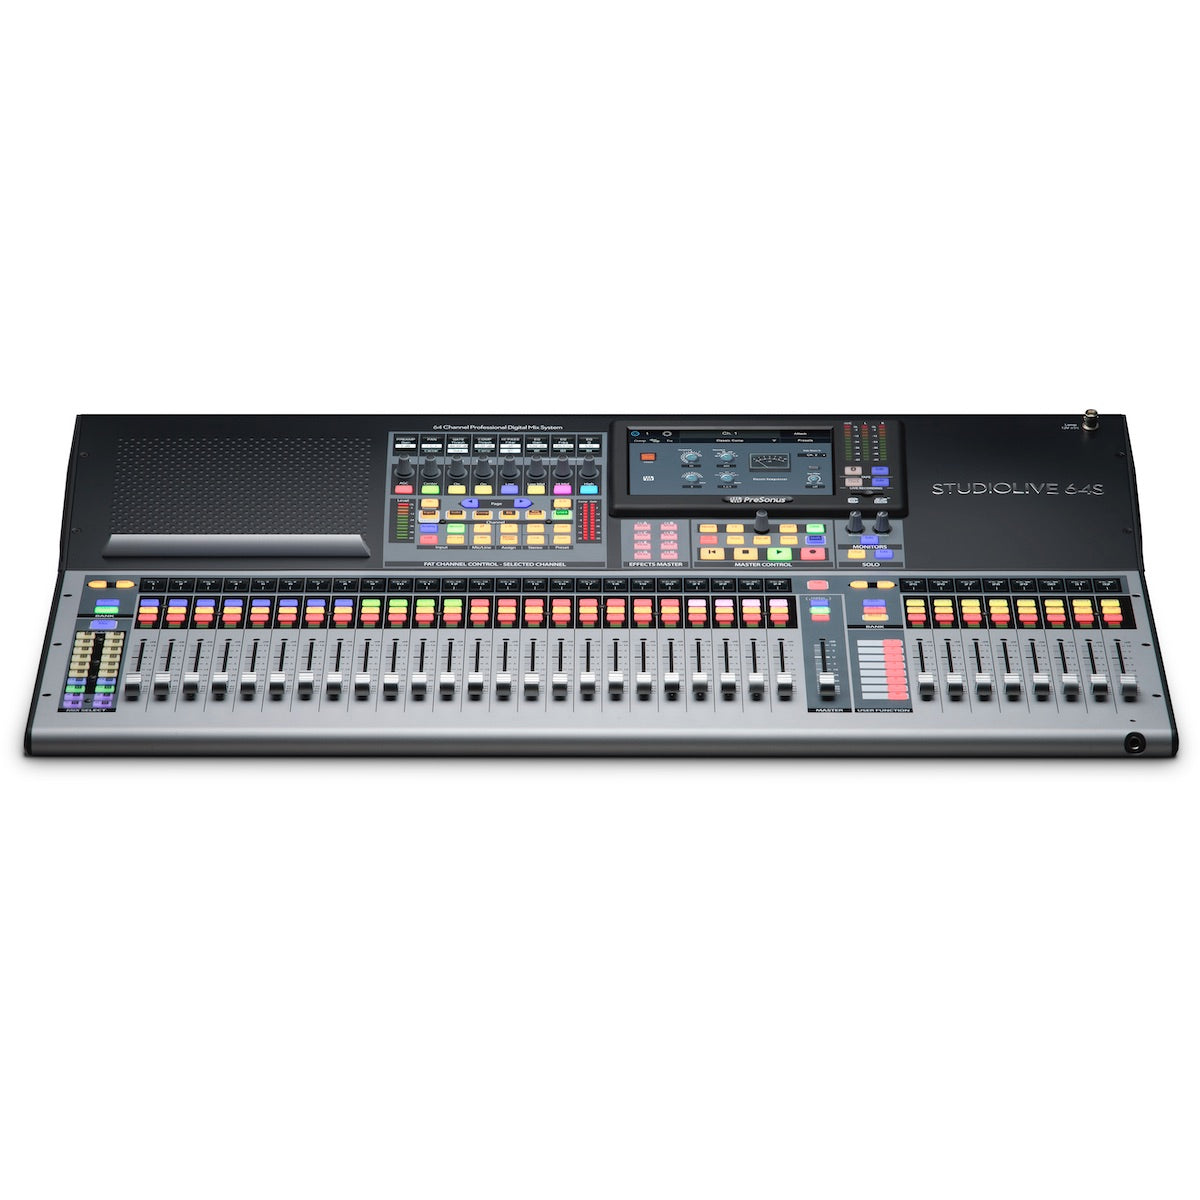 PreSonus StudioLive 64S - 64-channel Digital Mixer with Effects, front